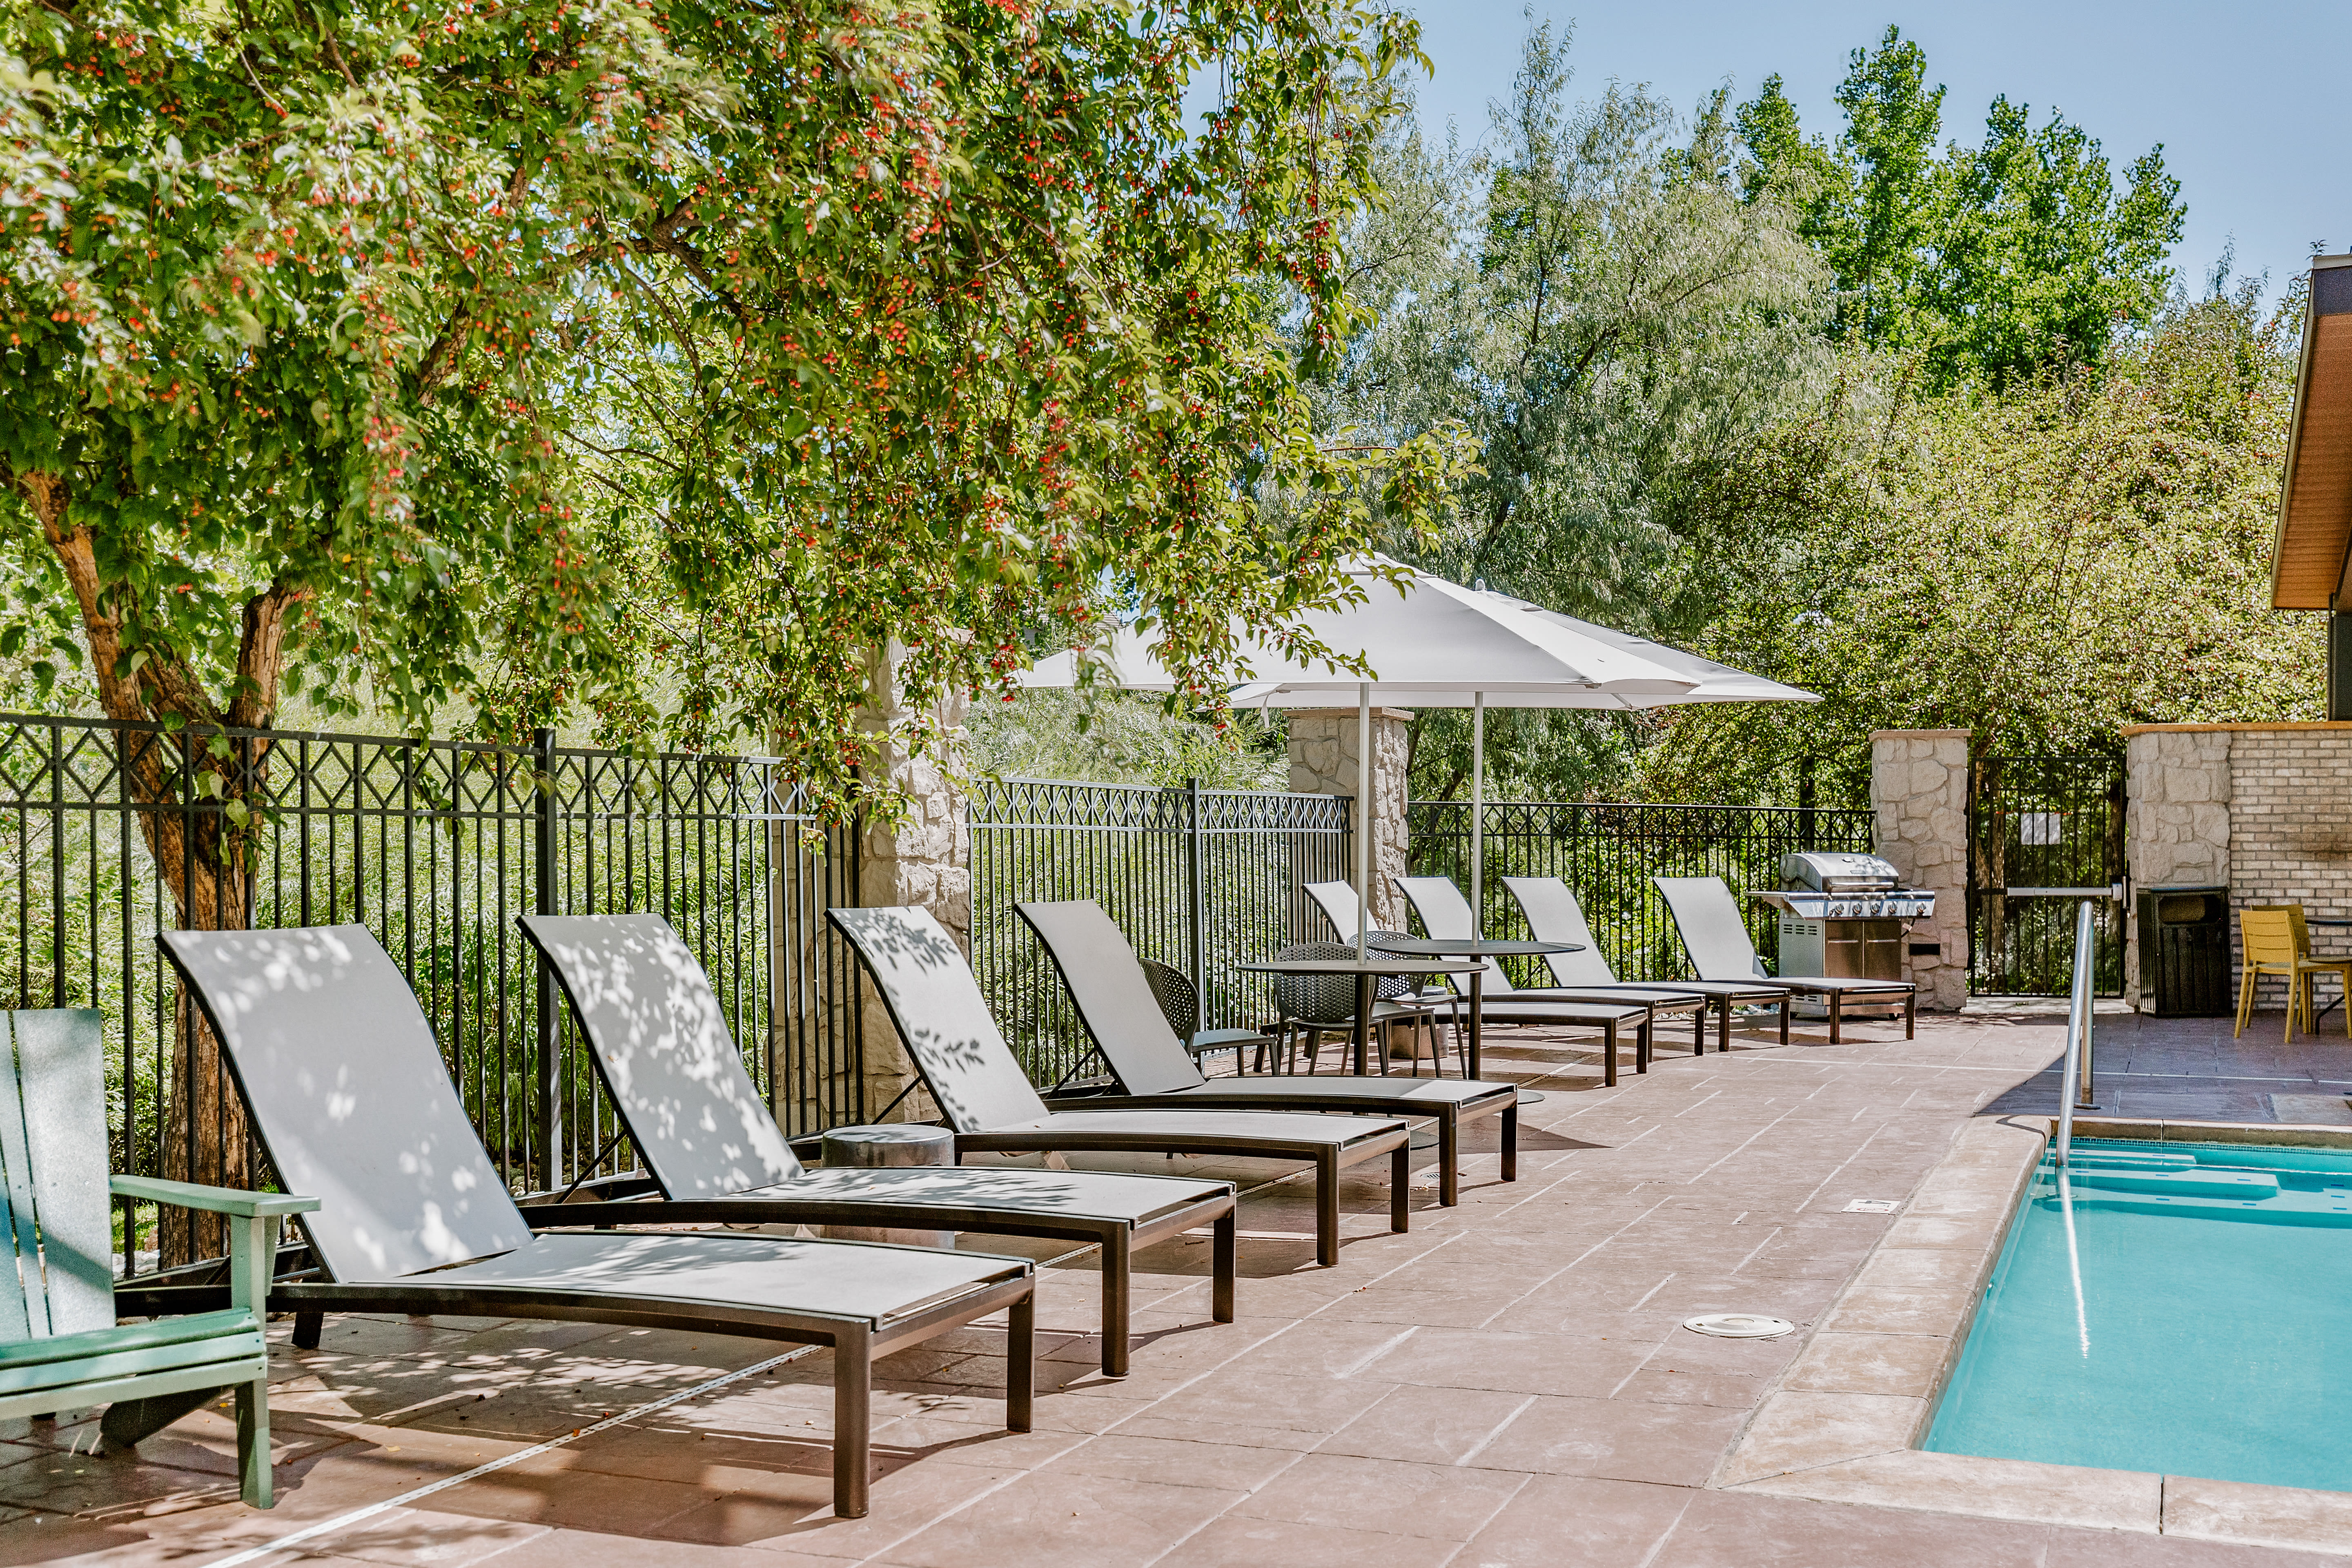 Covered lounge seating by the pool at Isabella Apartment Homes in Greenwood Village, Colorado